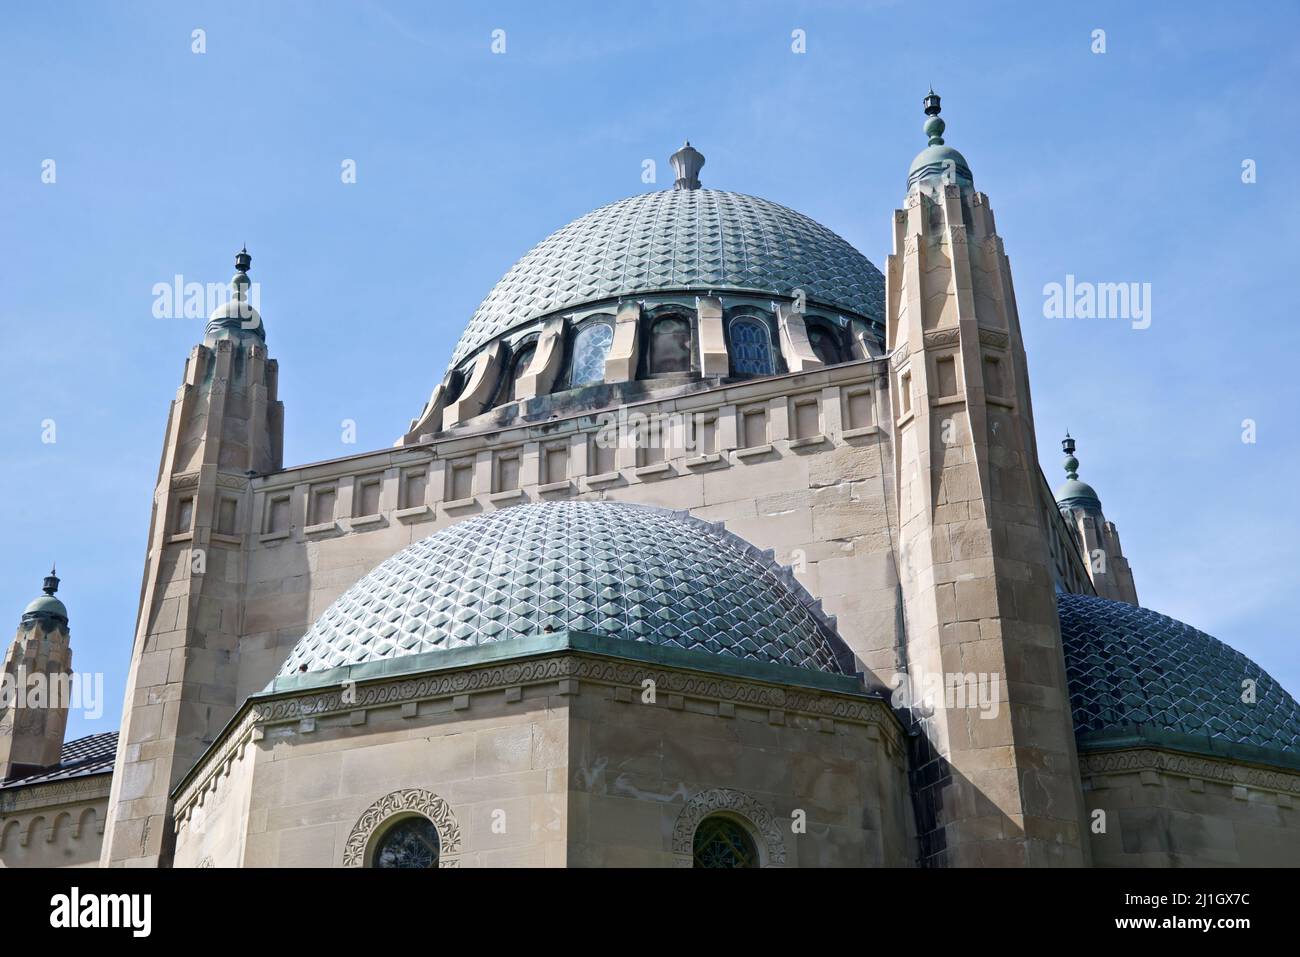 Memorial building exterior with architectural dome Stock Photo